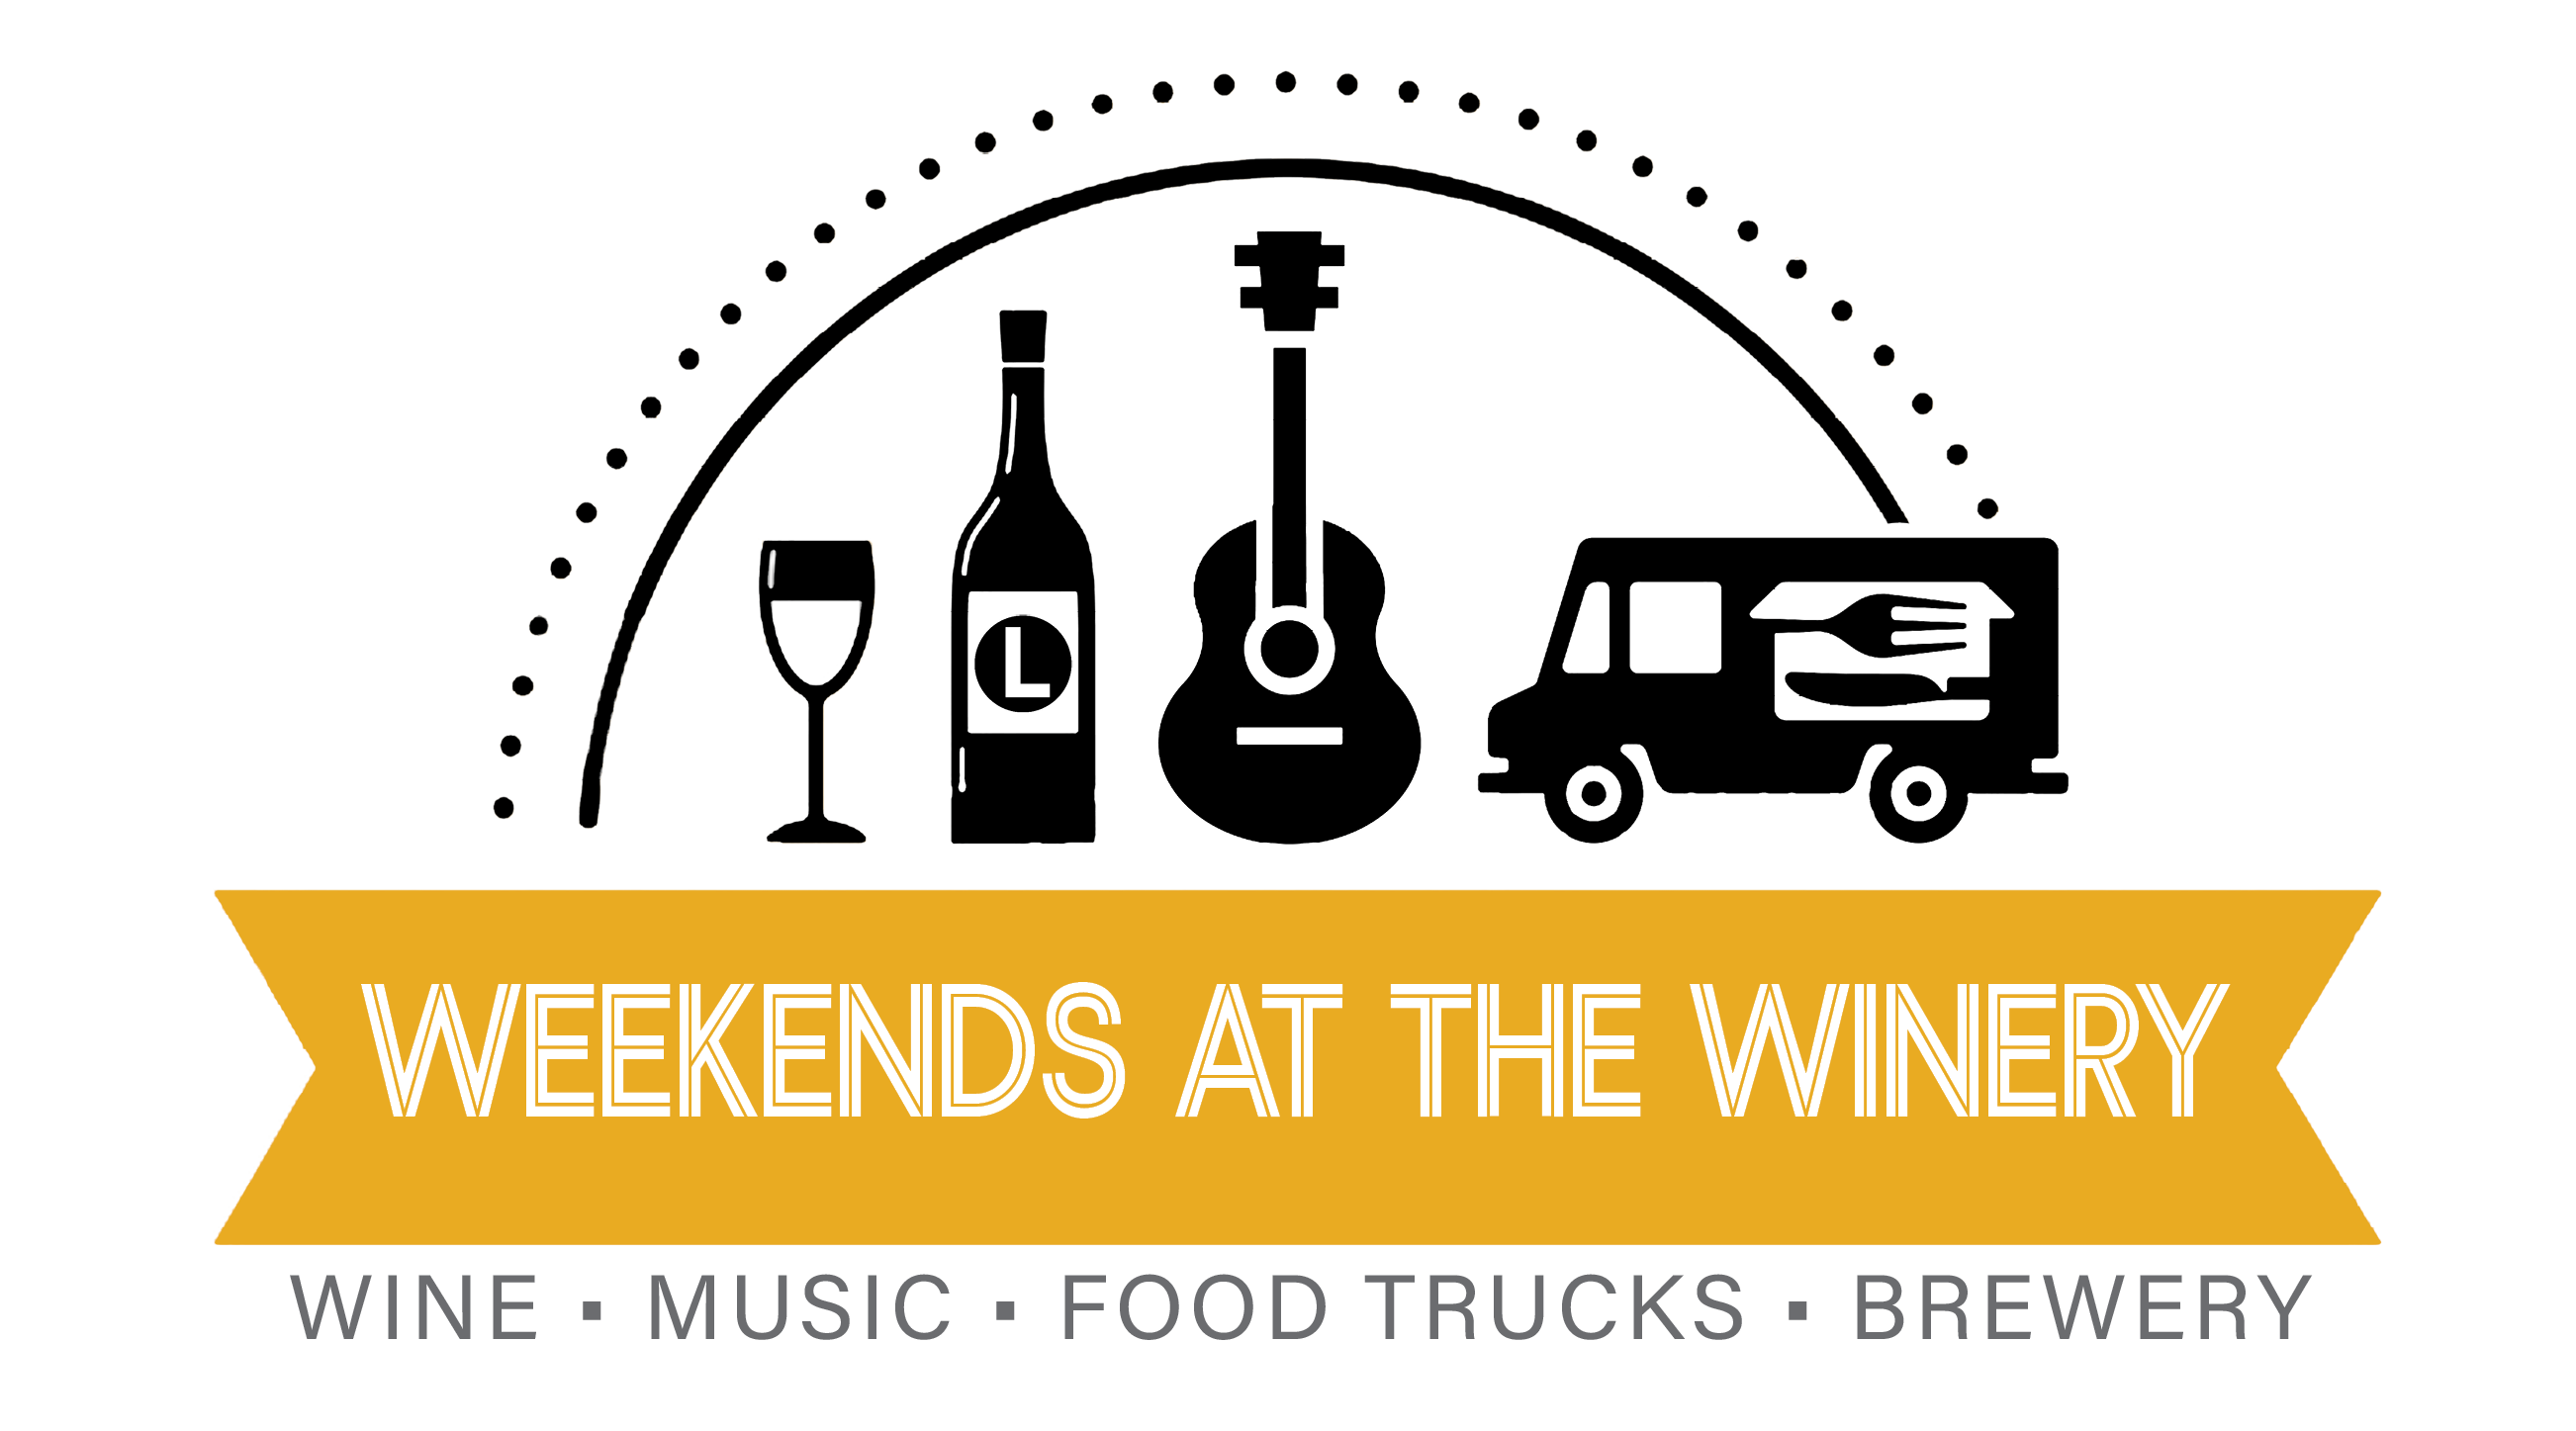 weekends at the winery graphic with gold banner